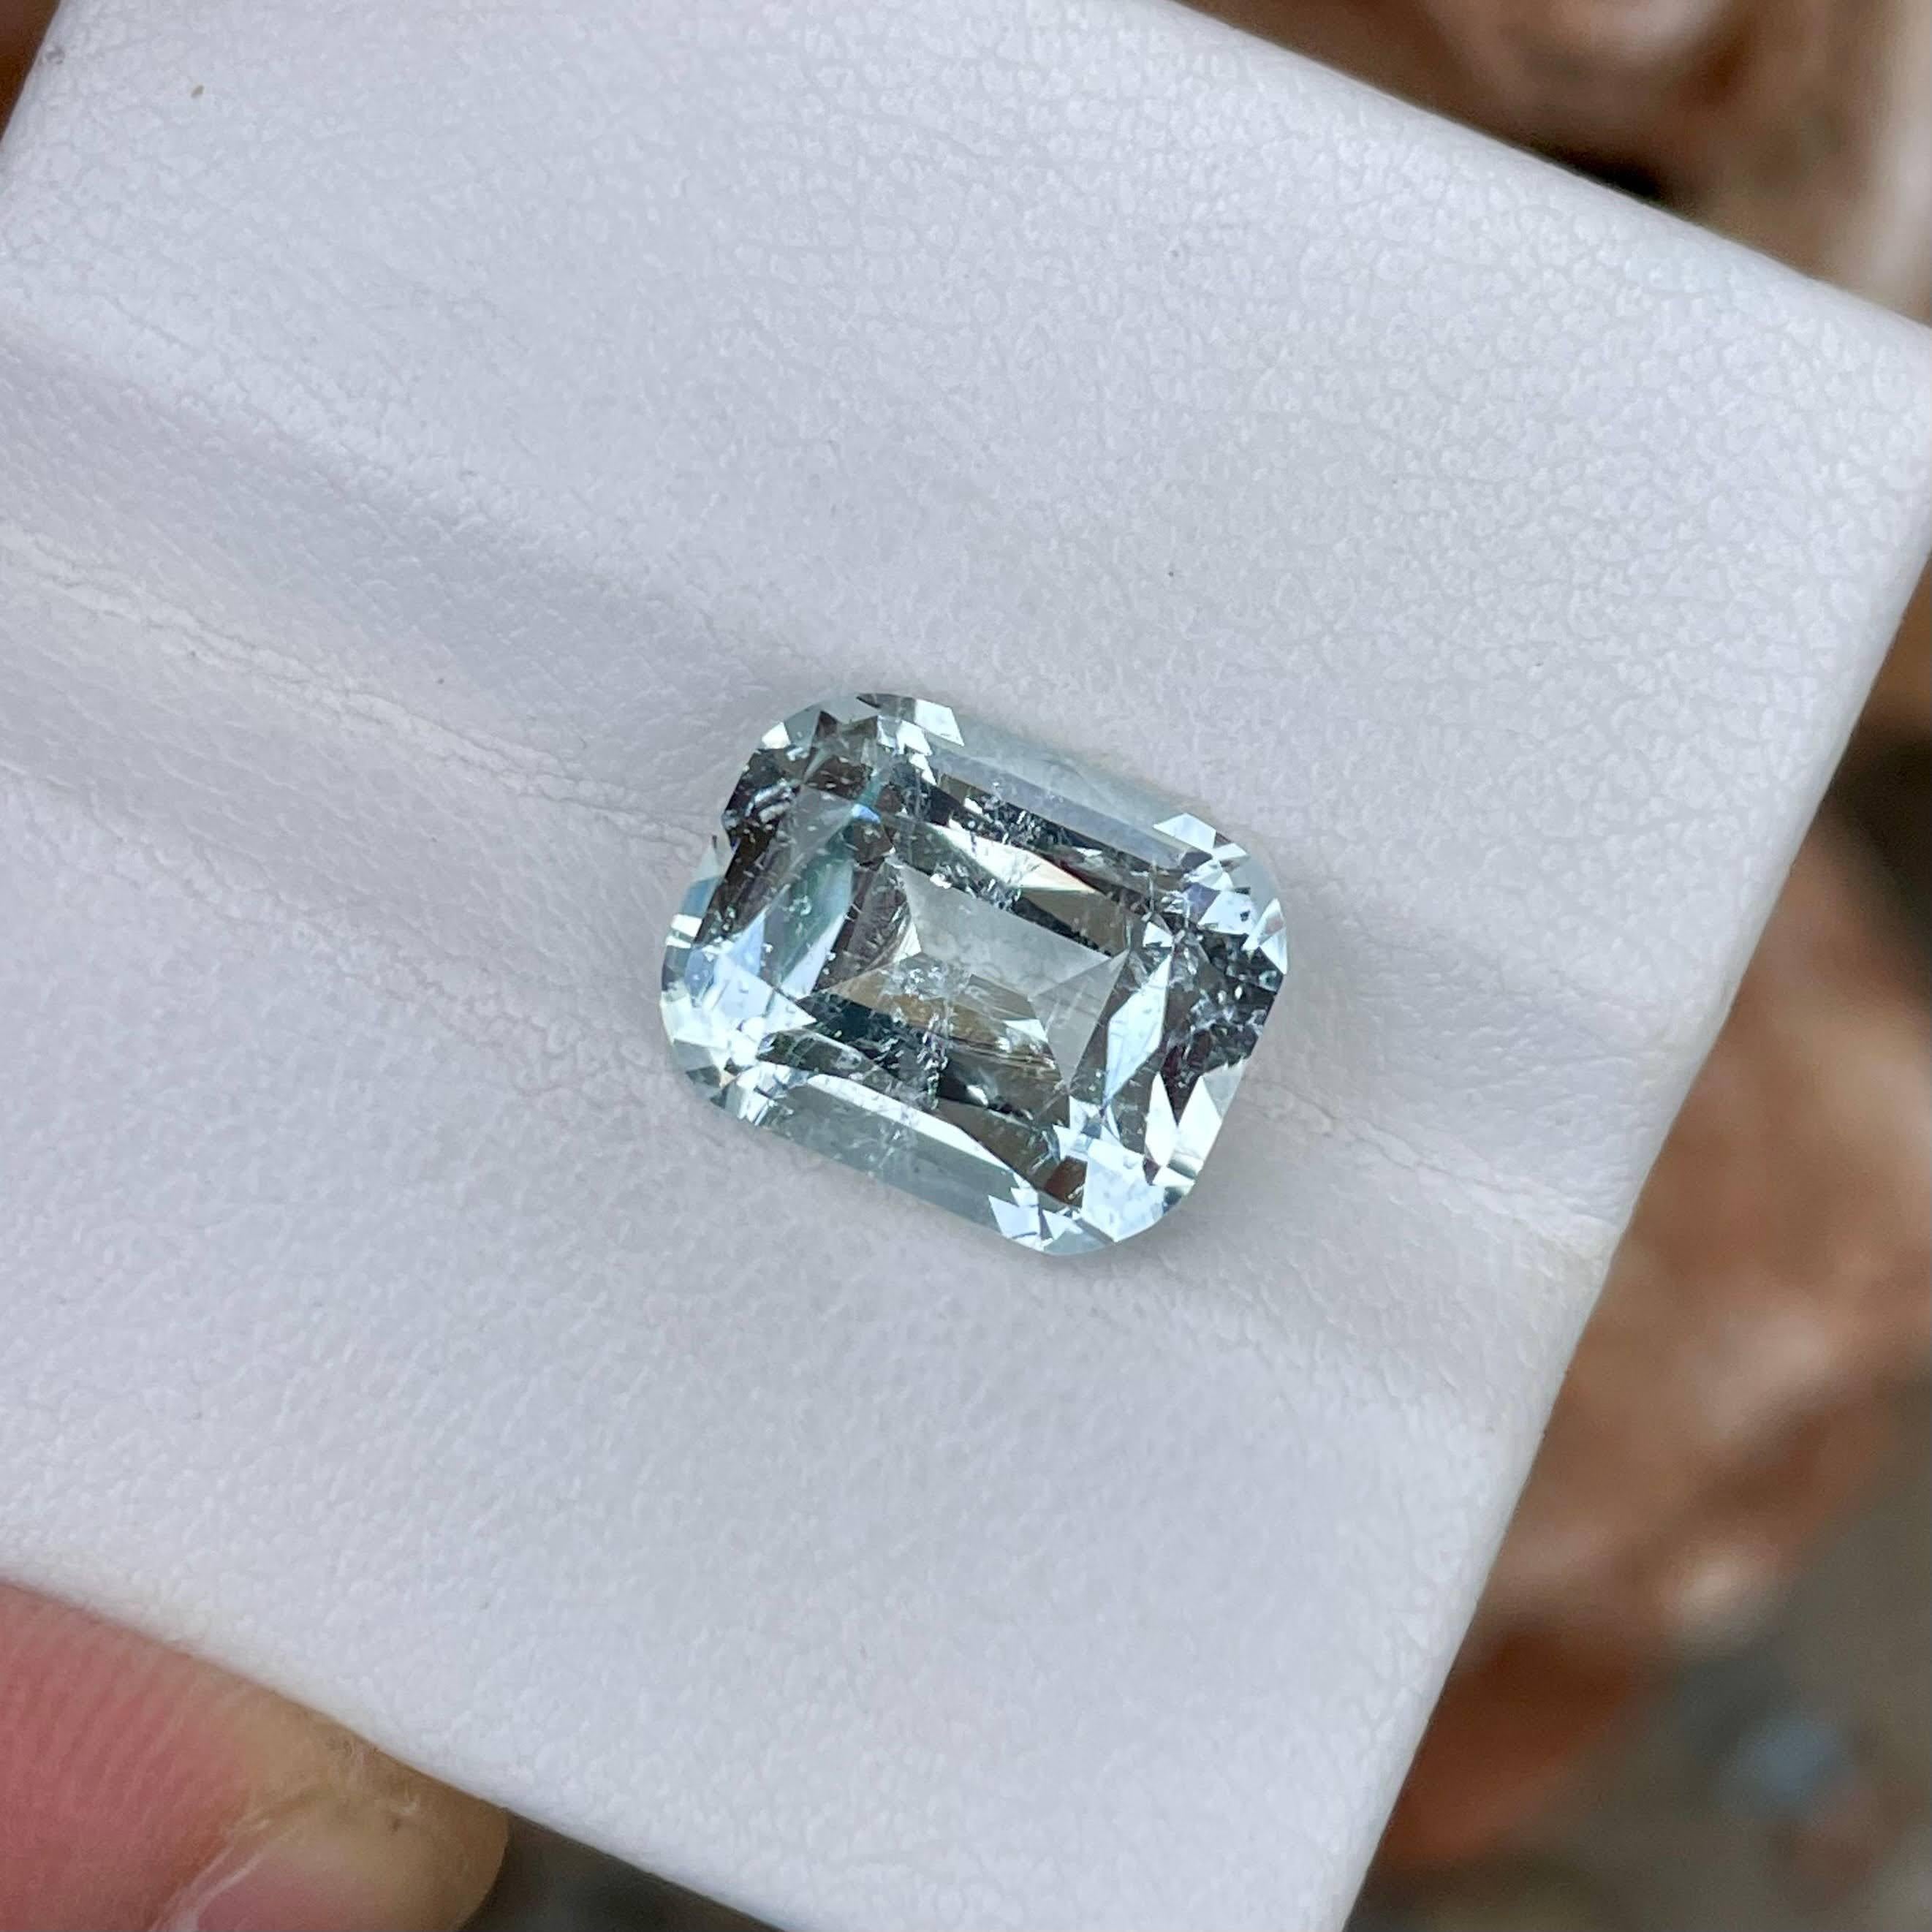 Weight 5.60 carats 
Dimensions 12.3x9.8x7.0 mm
Treatment none 
Origin Pakistan 
Clarity SI
Shape cushion 
Cut fancy cushion 




The Sea Blue Aquamarine gemstone, boasting a generous weight of 5.60 carats, presents an exquisite display of natural